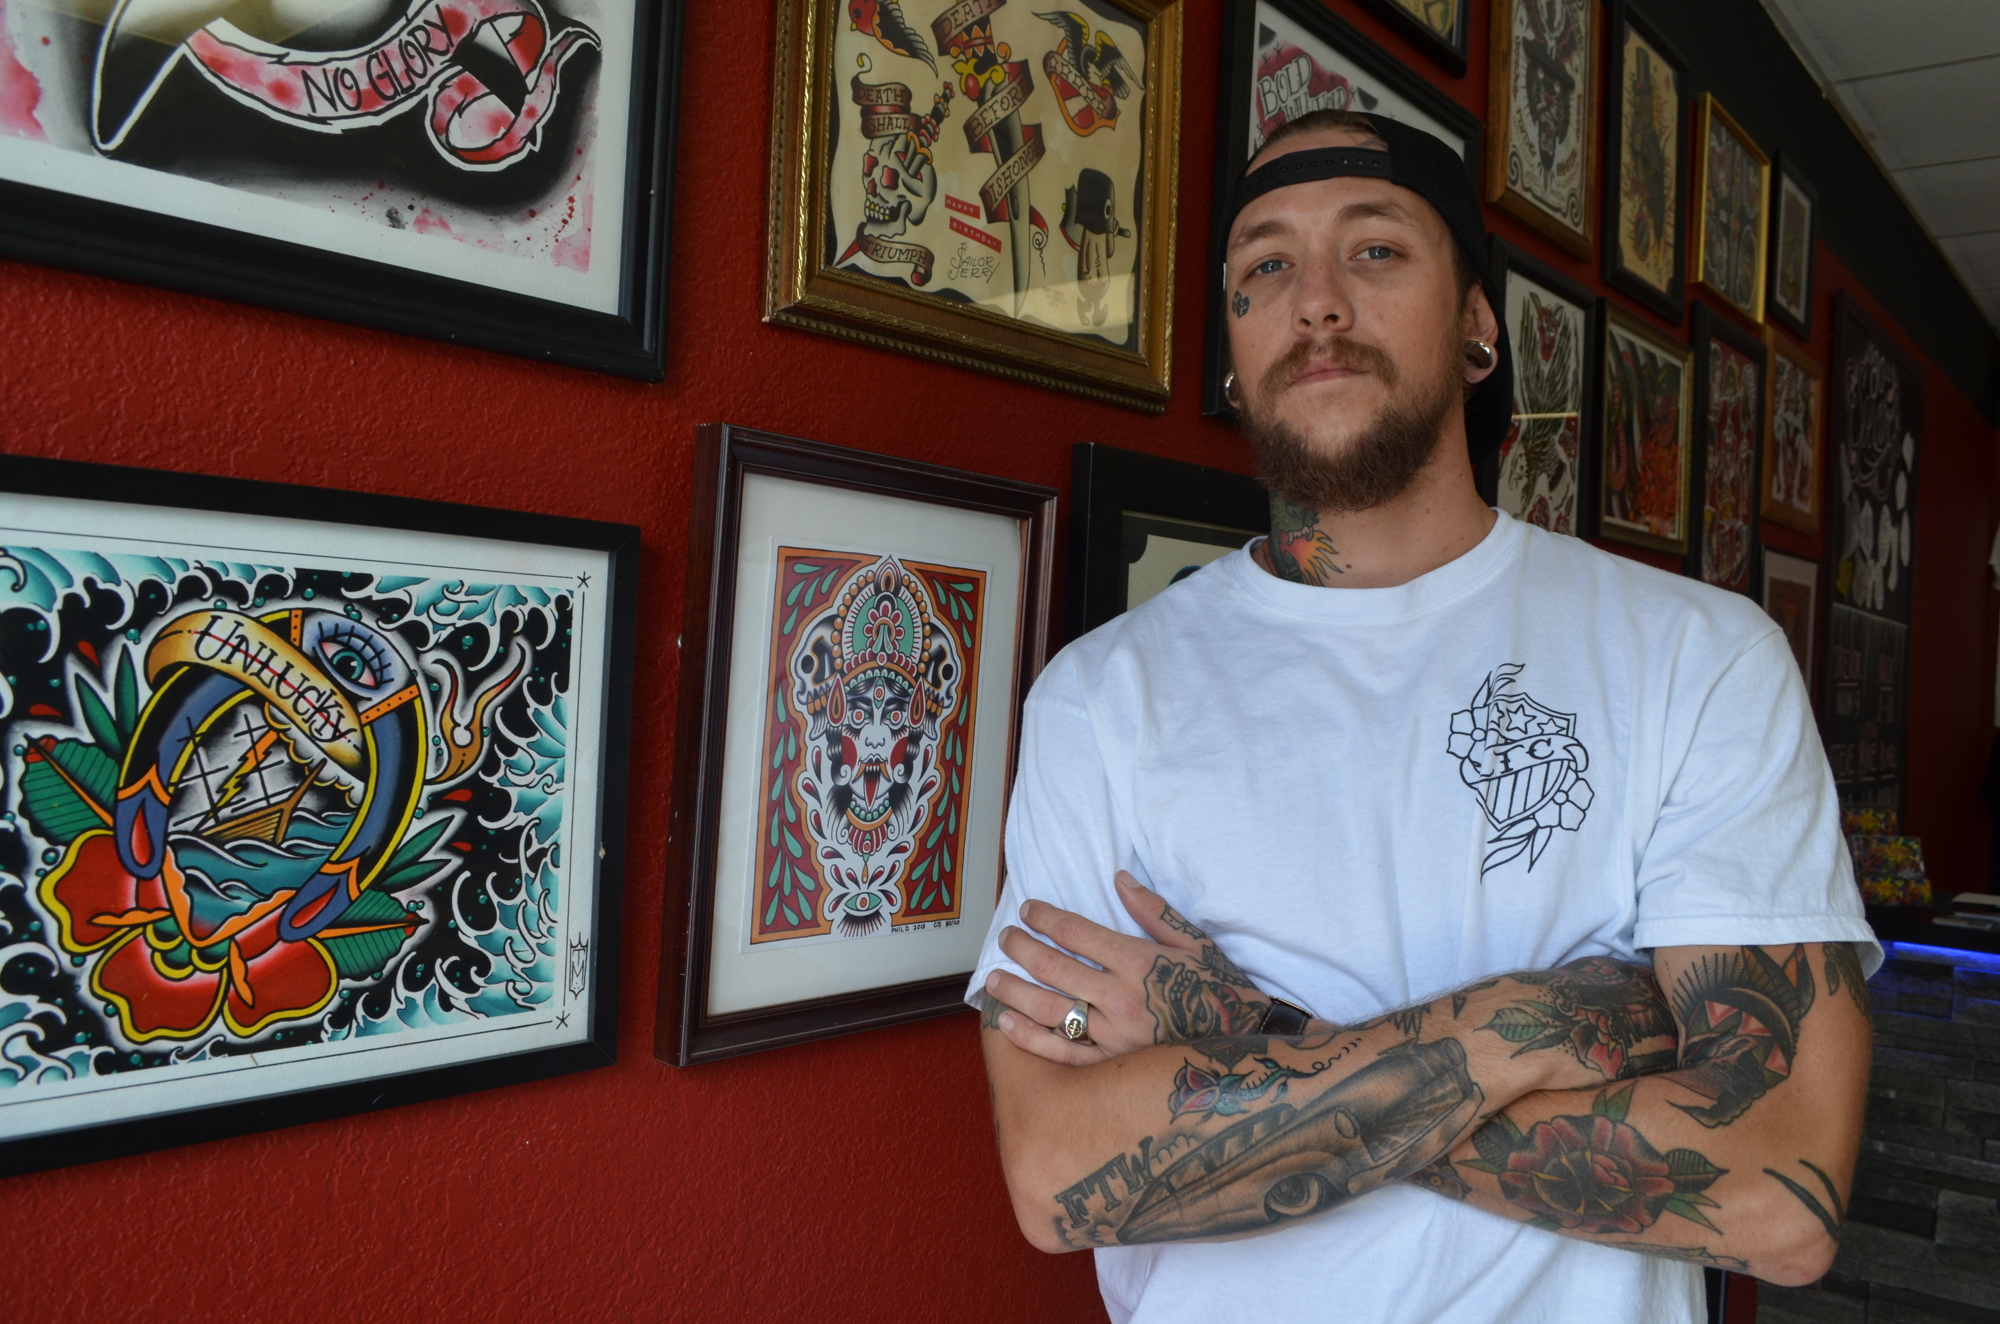 Inking Tradition: Liberty Tattoo Club's Old-School Style